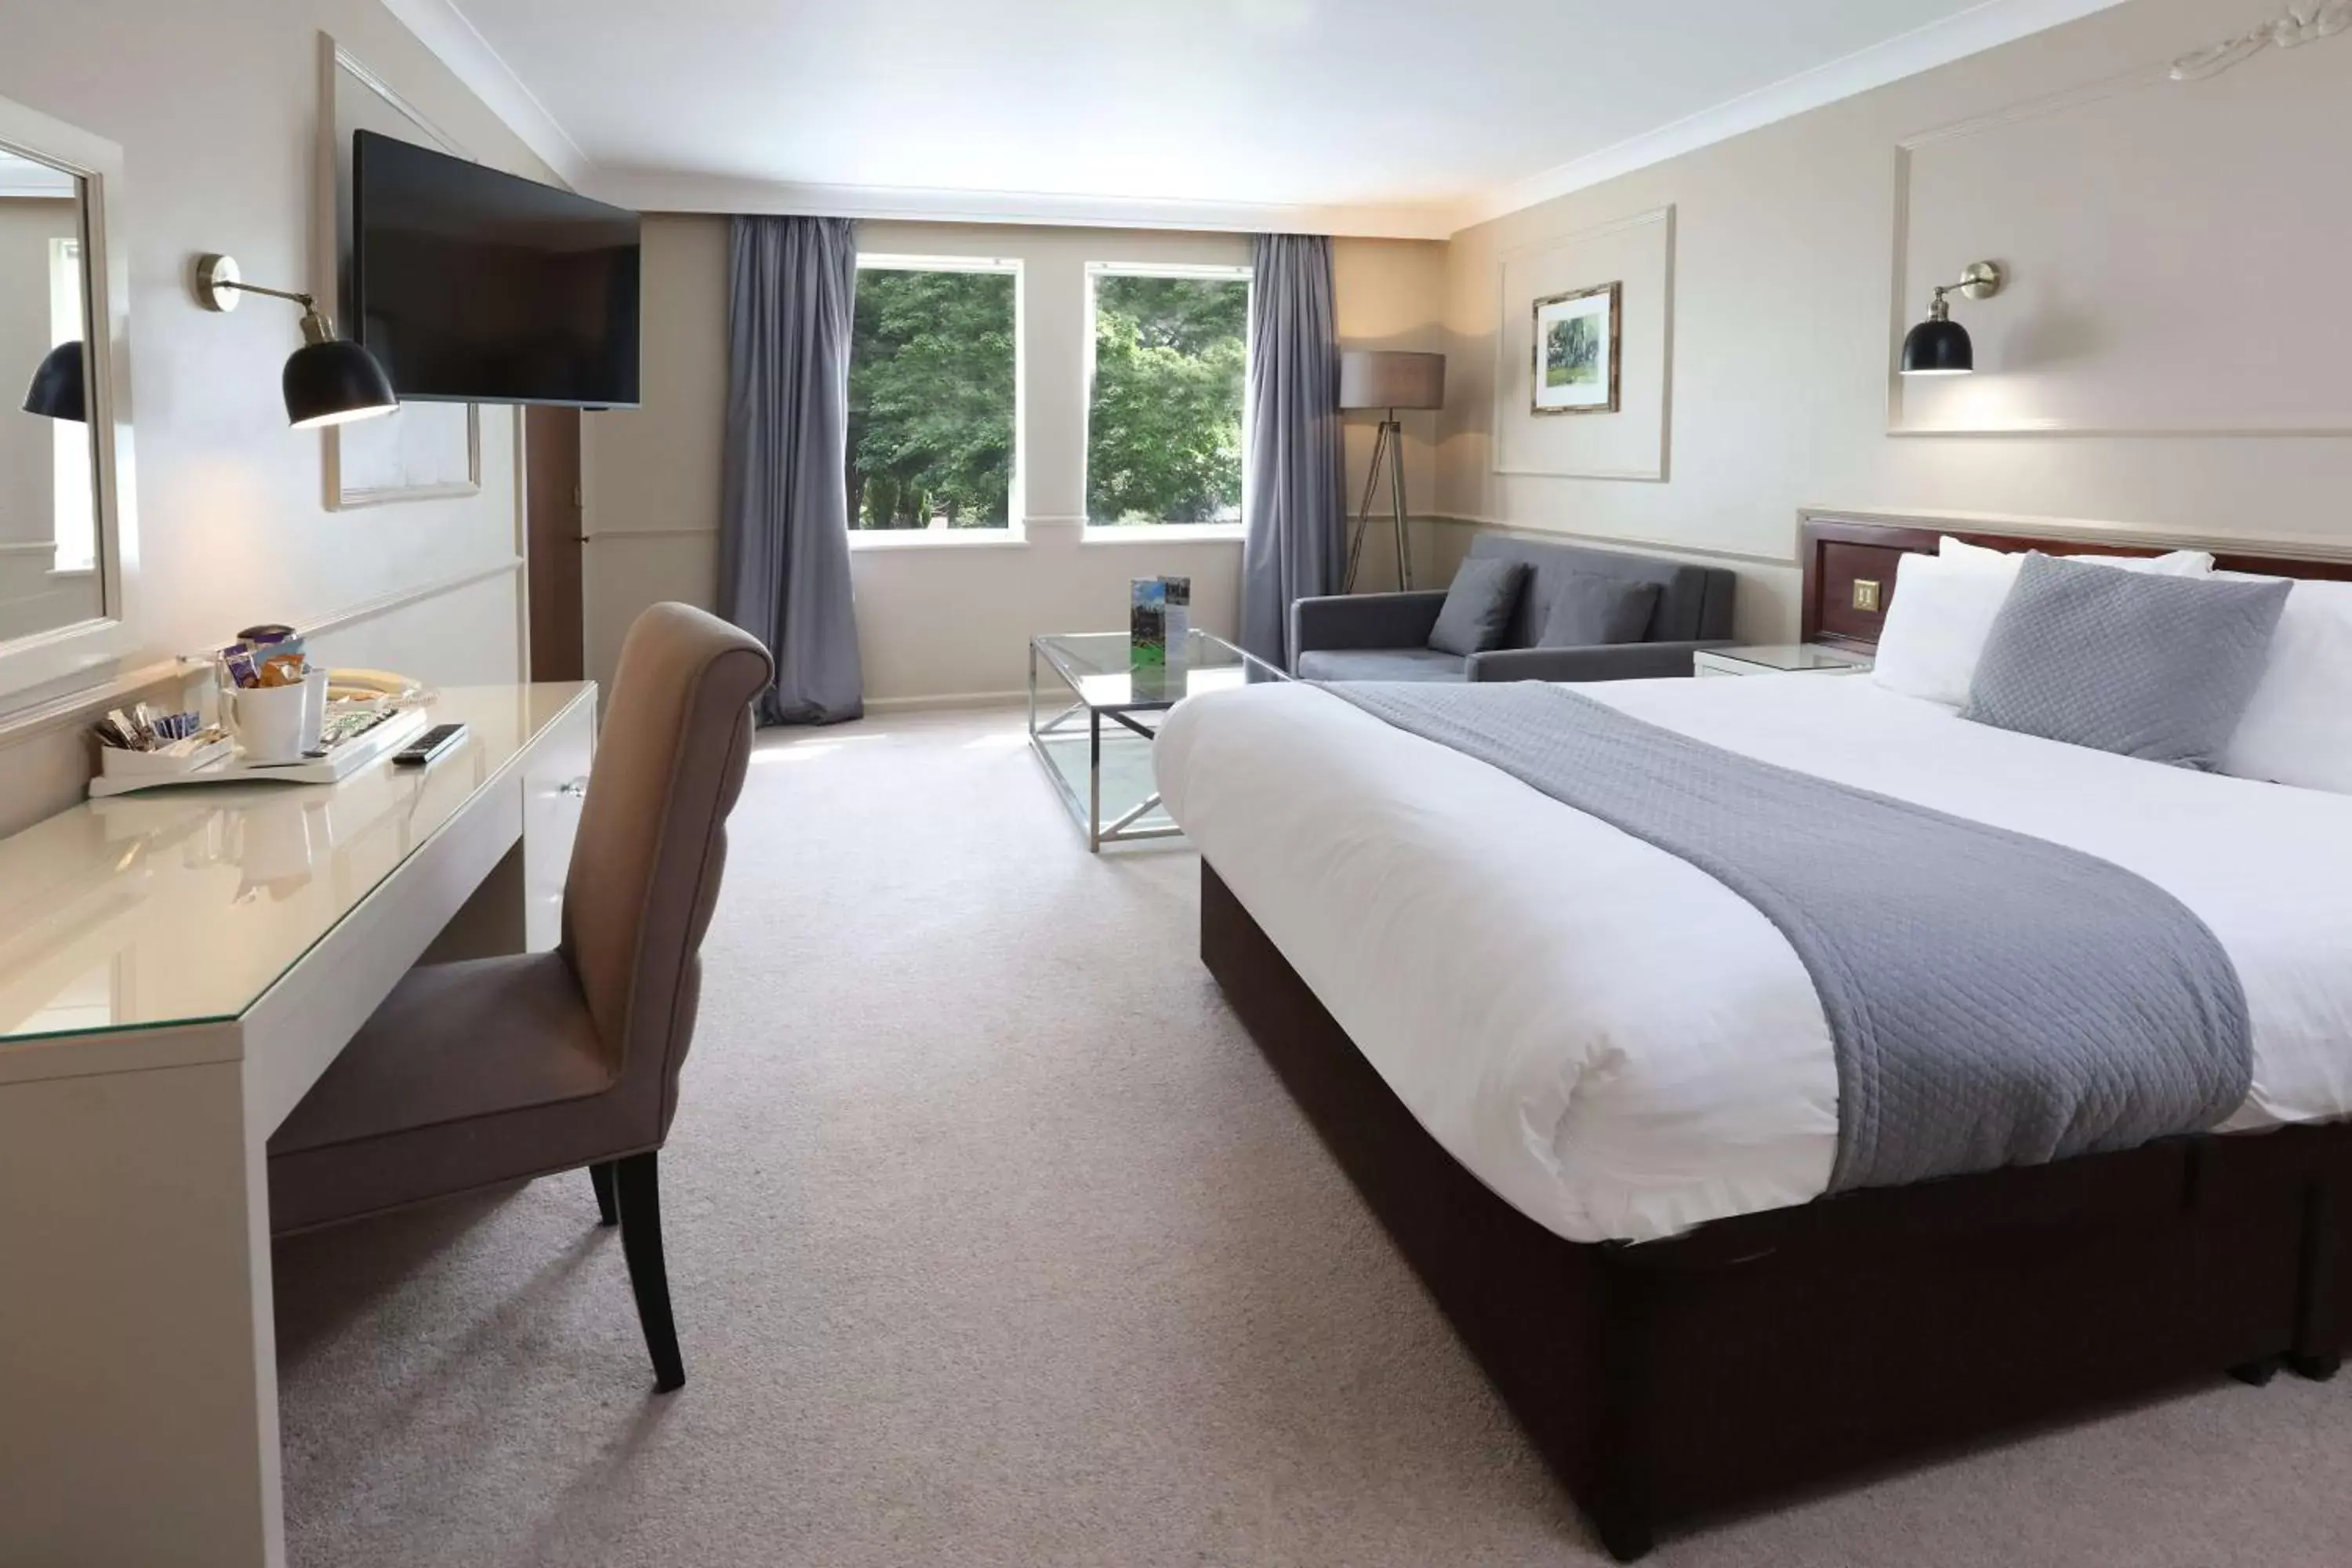 Superior Double Bed with Garden View - Non-Smoking in Moor Hall Hotel & Spa, BW Premier Collection